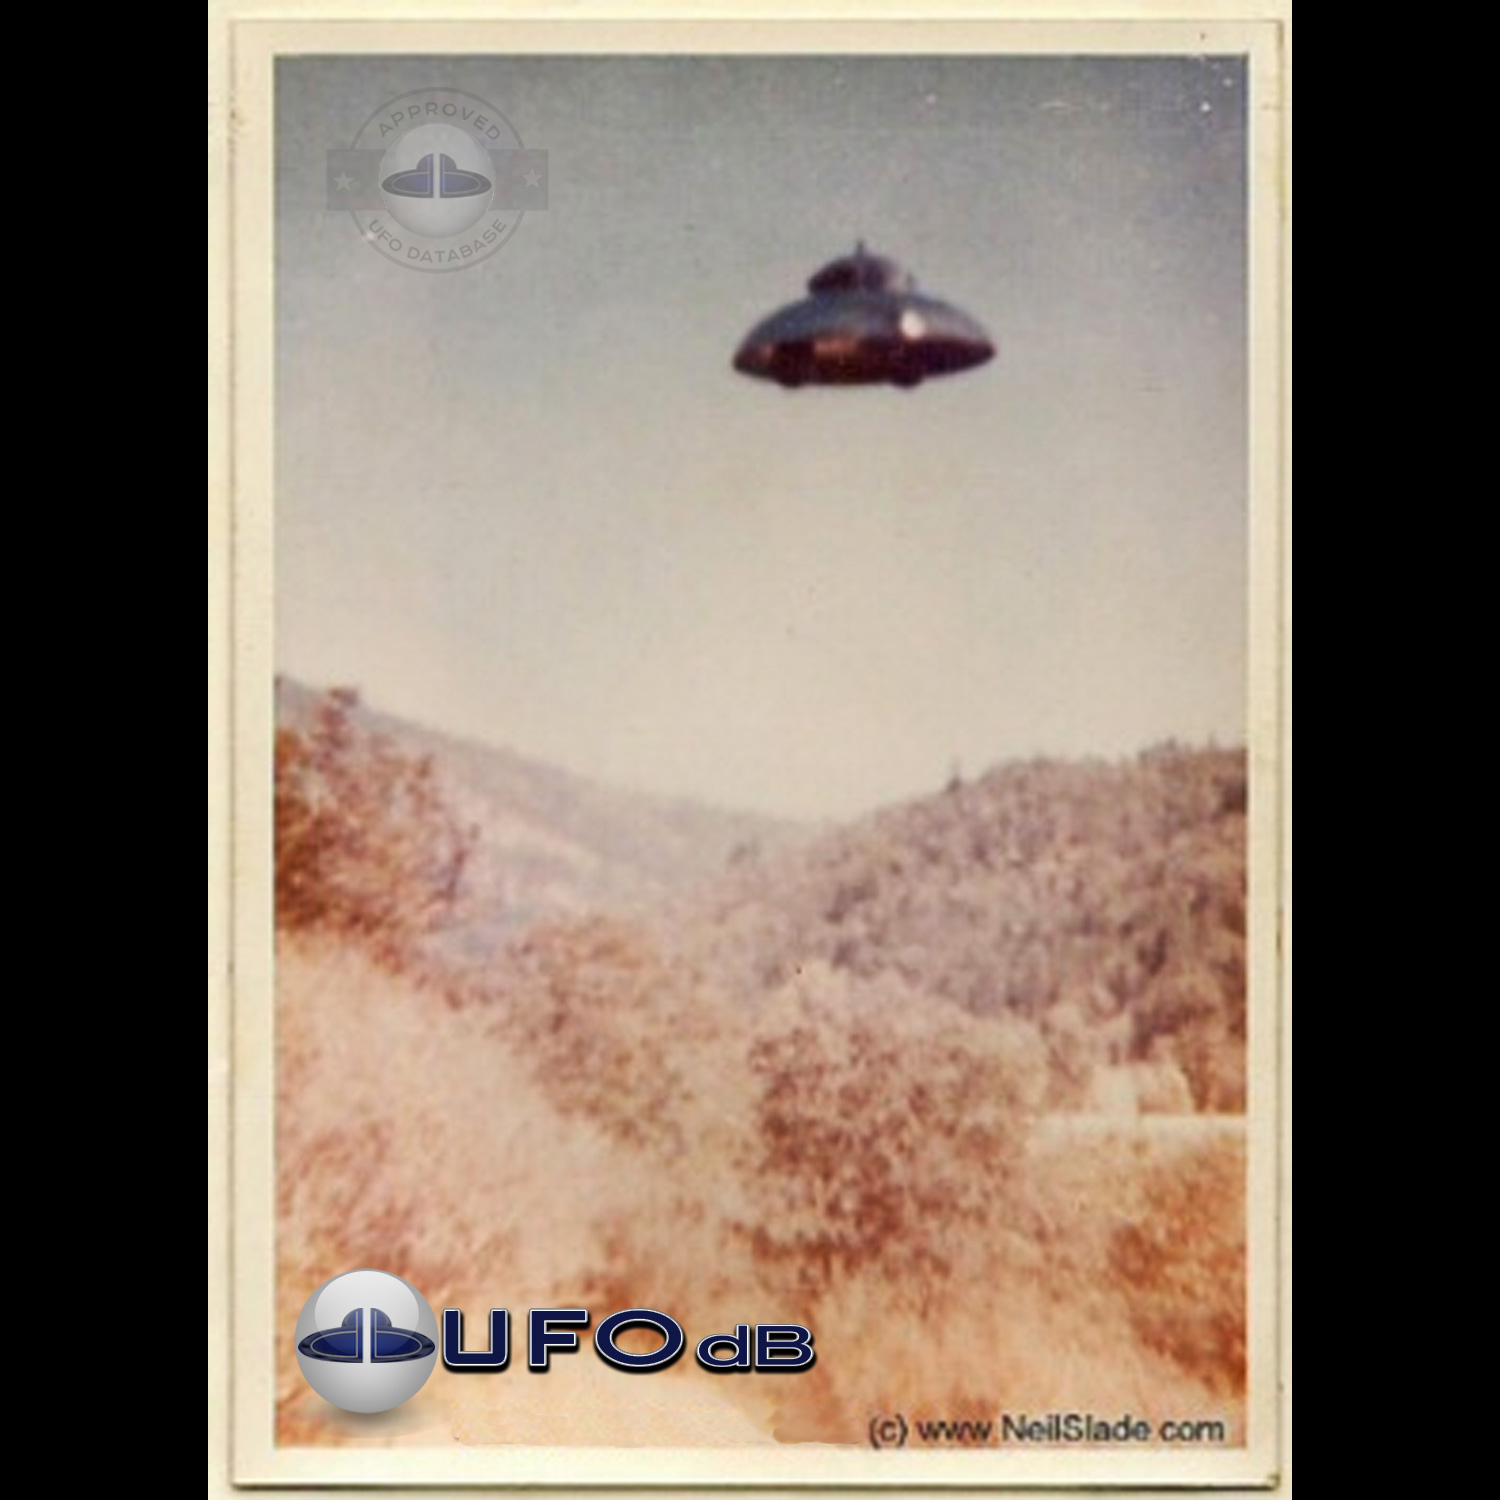 This UFO picture has been in several reports and controversies, 1970s UFO Picture #138-1